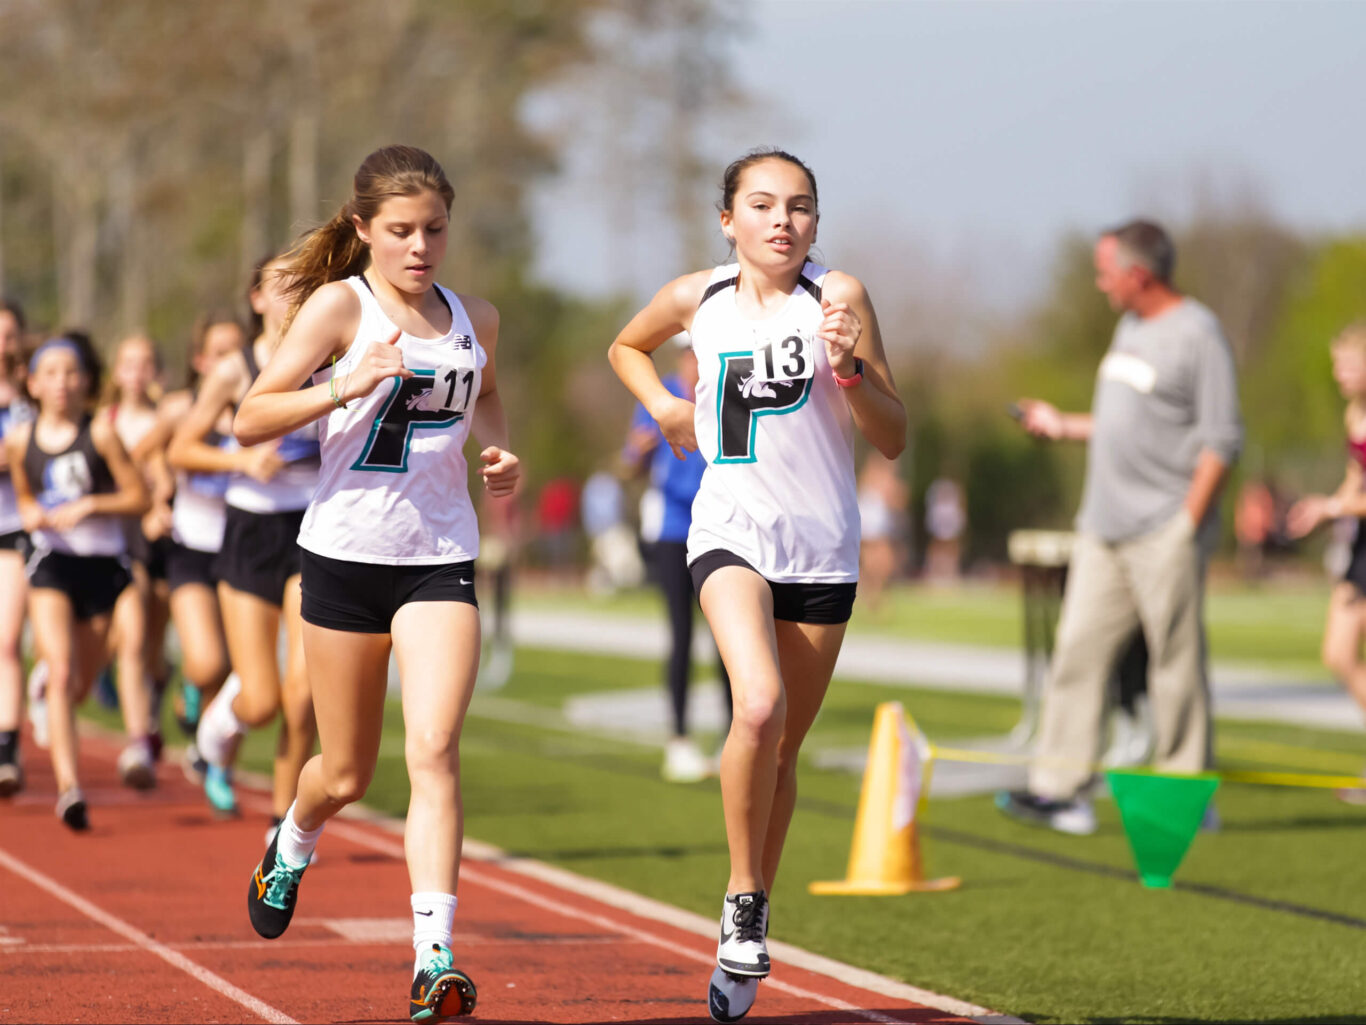 A group of girls participating in track and field events on a track.